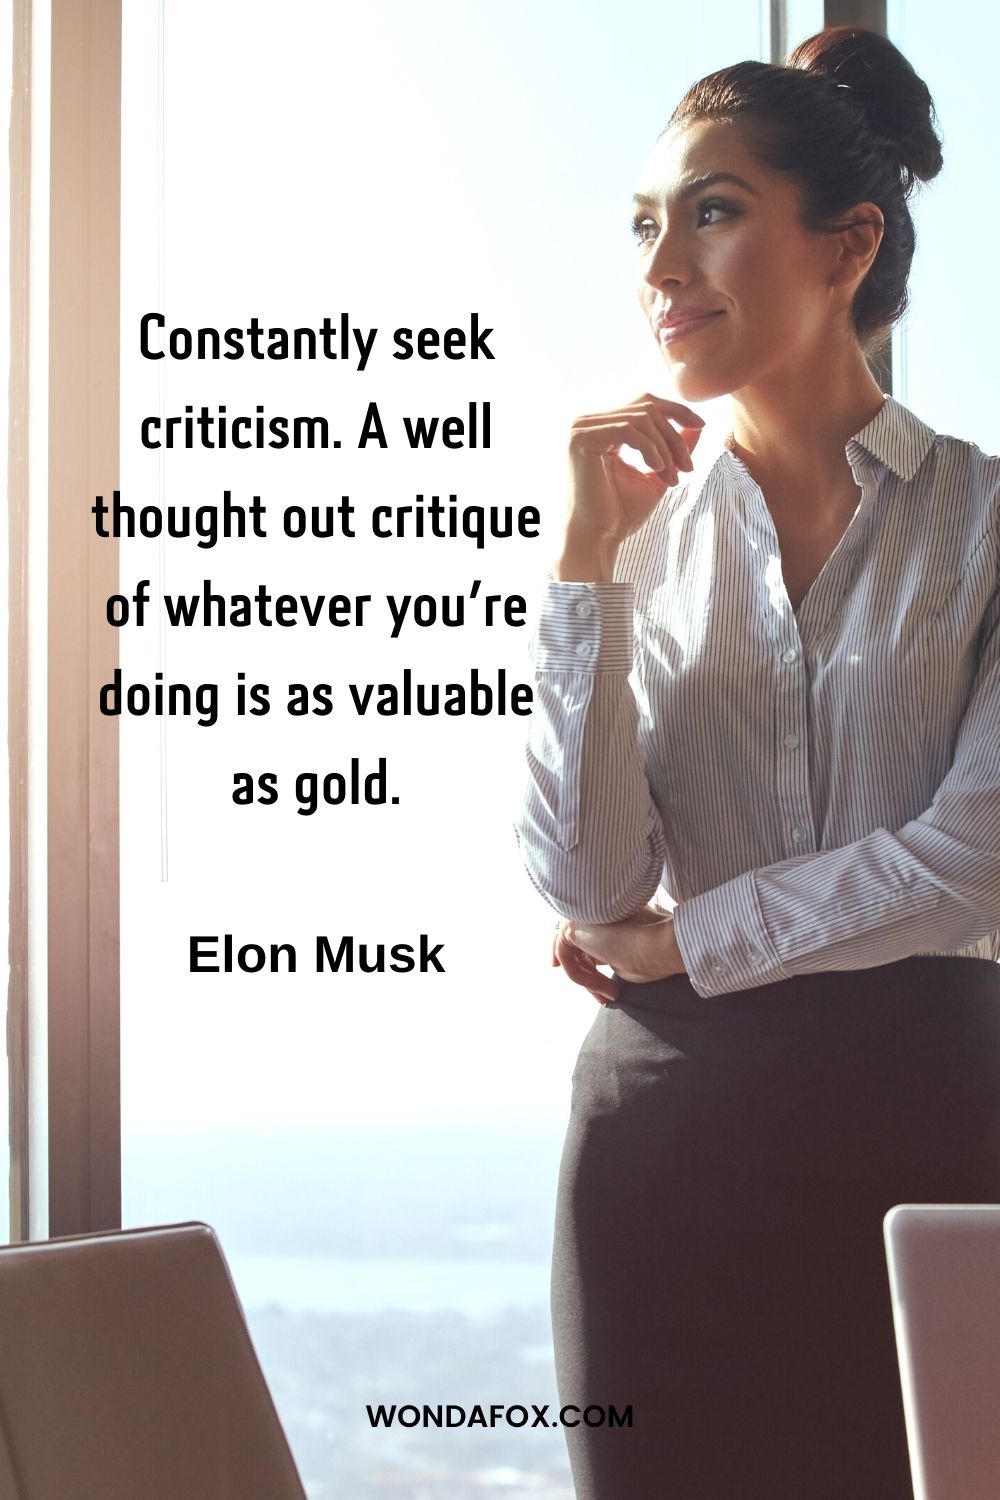 Constantly seek criticism. A well thought out critique of whatever you’re doing is as valuable as gold.”